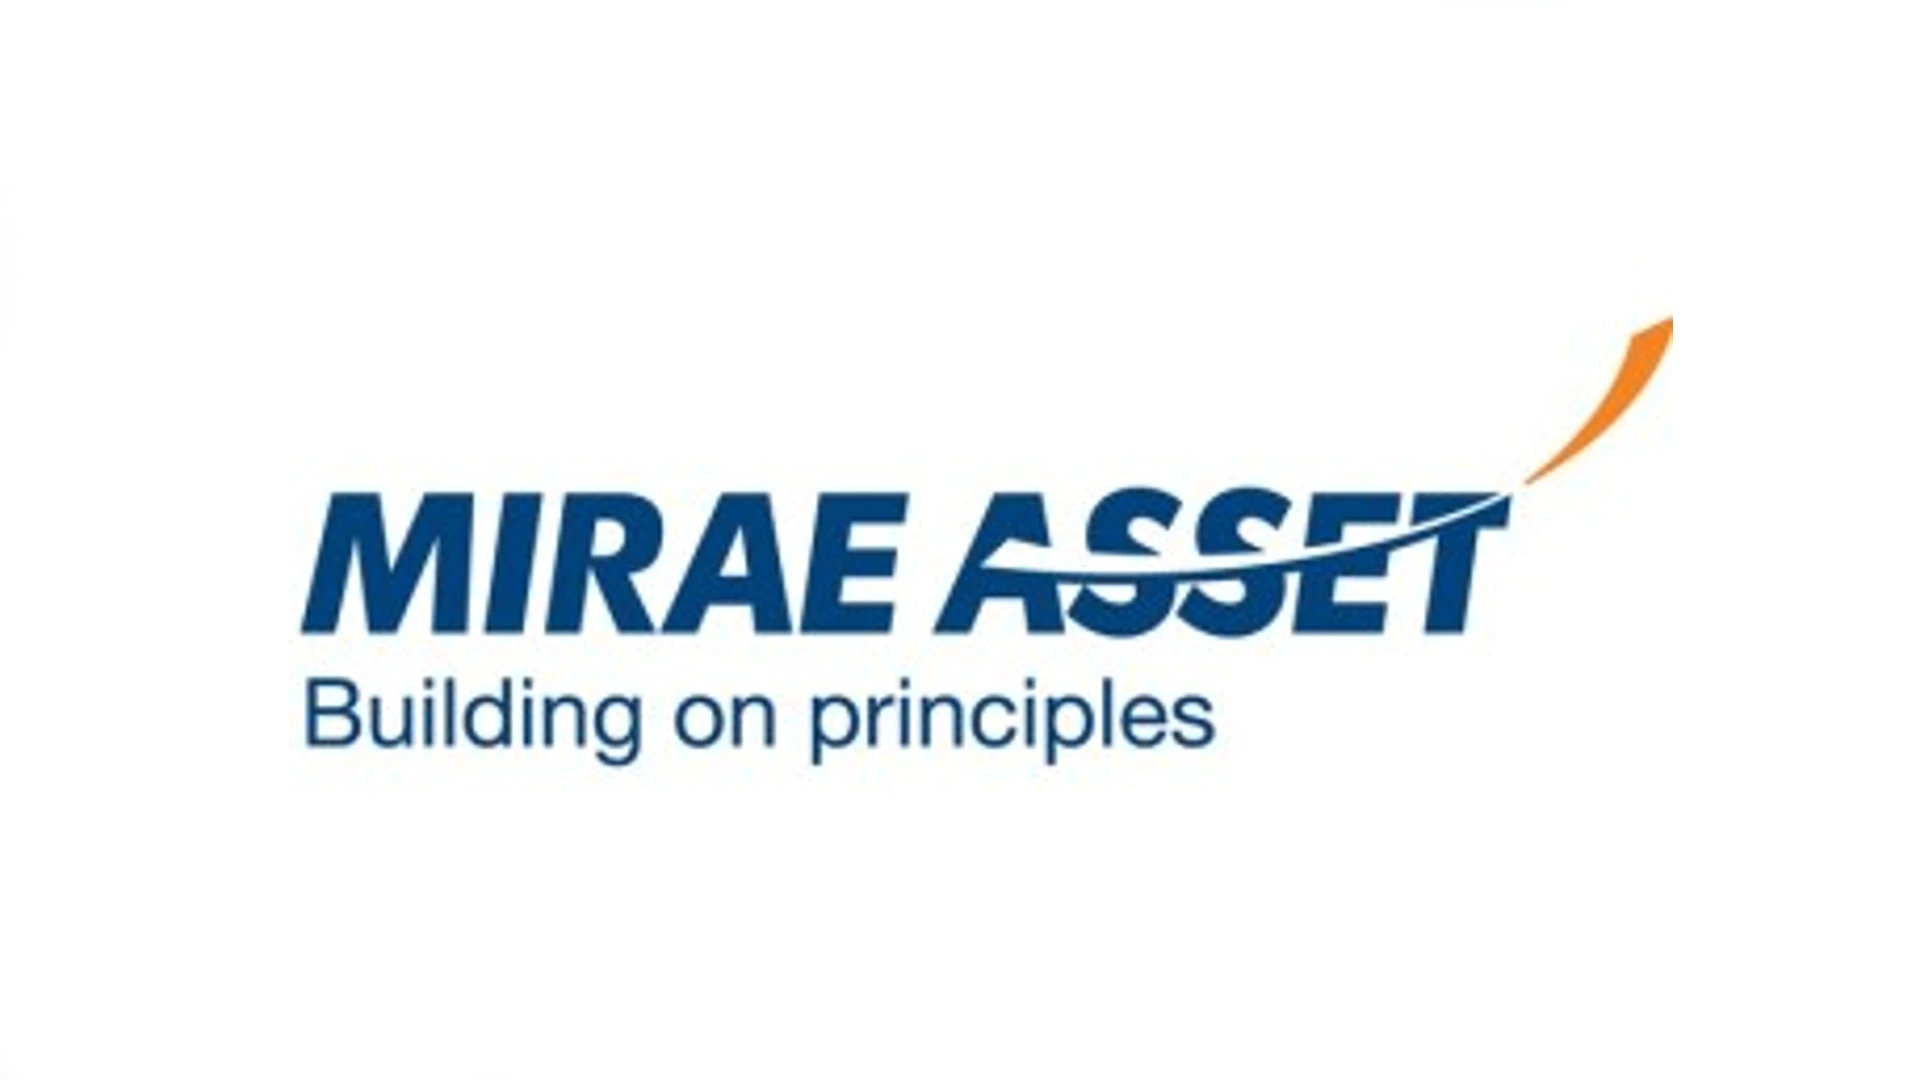 Mirae Asset Foundation announces Scholarships for MBA students of NMIMS